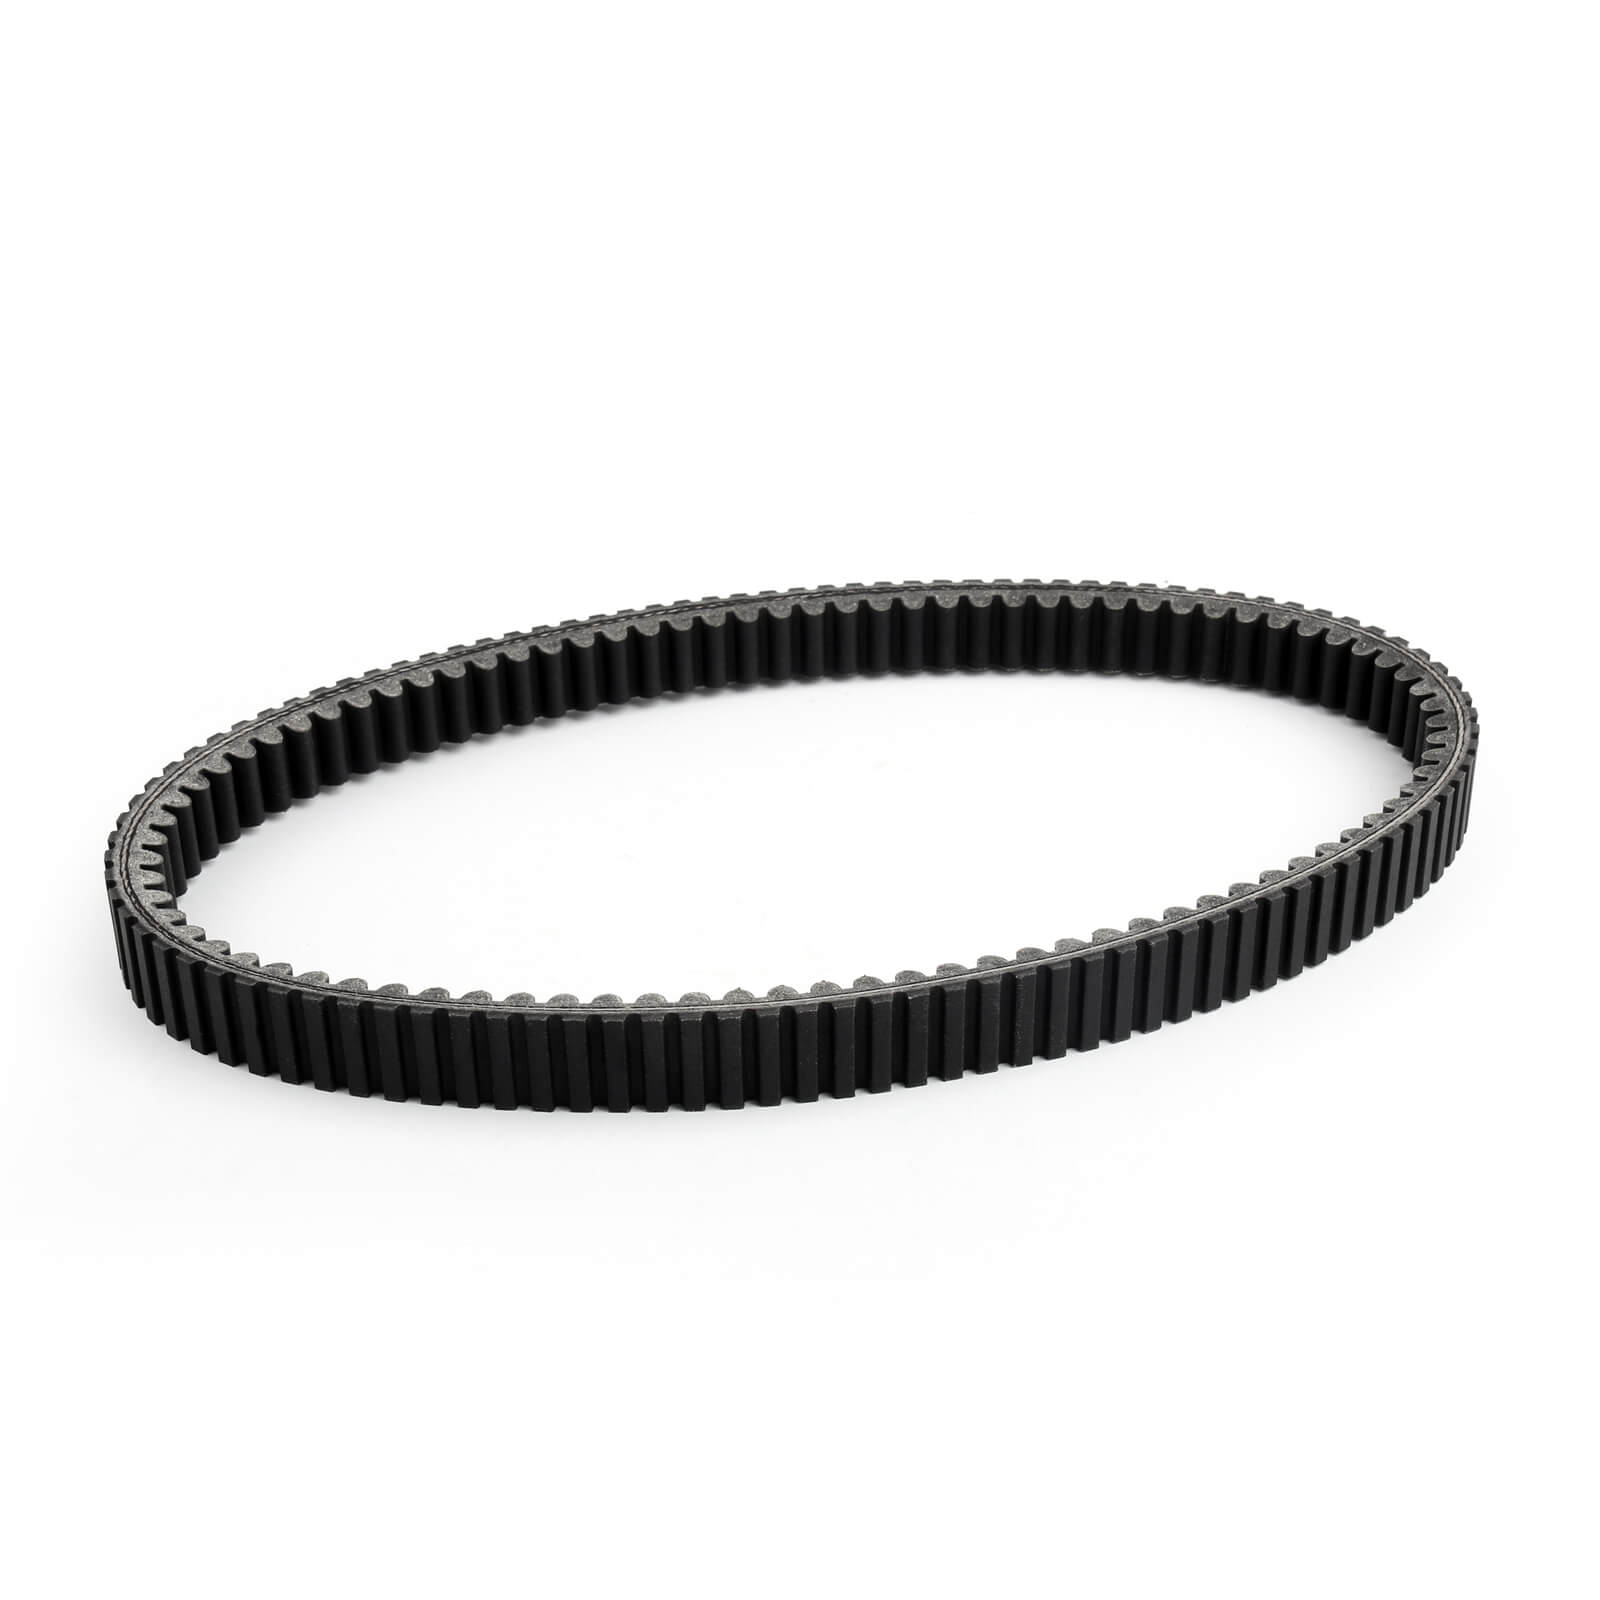 CVT Drive Belt For KYMCO Xciting 400 2011-2015 2014 2013